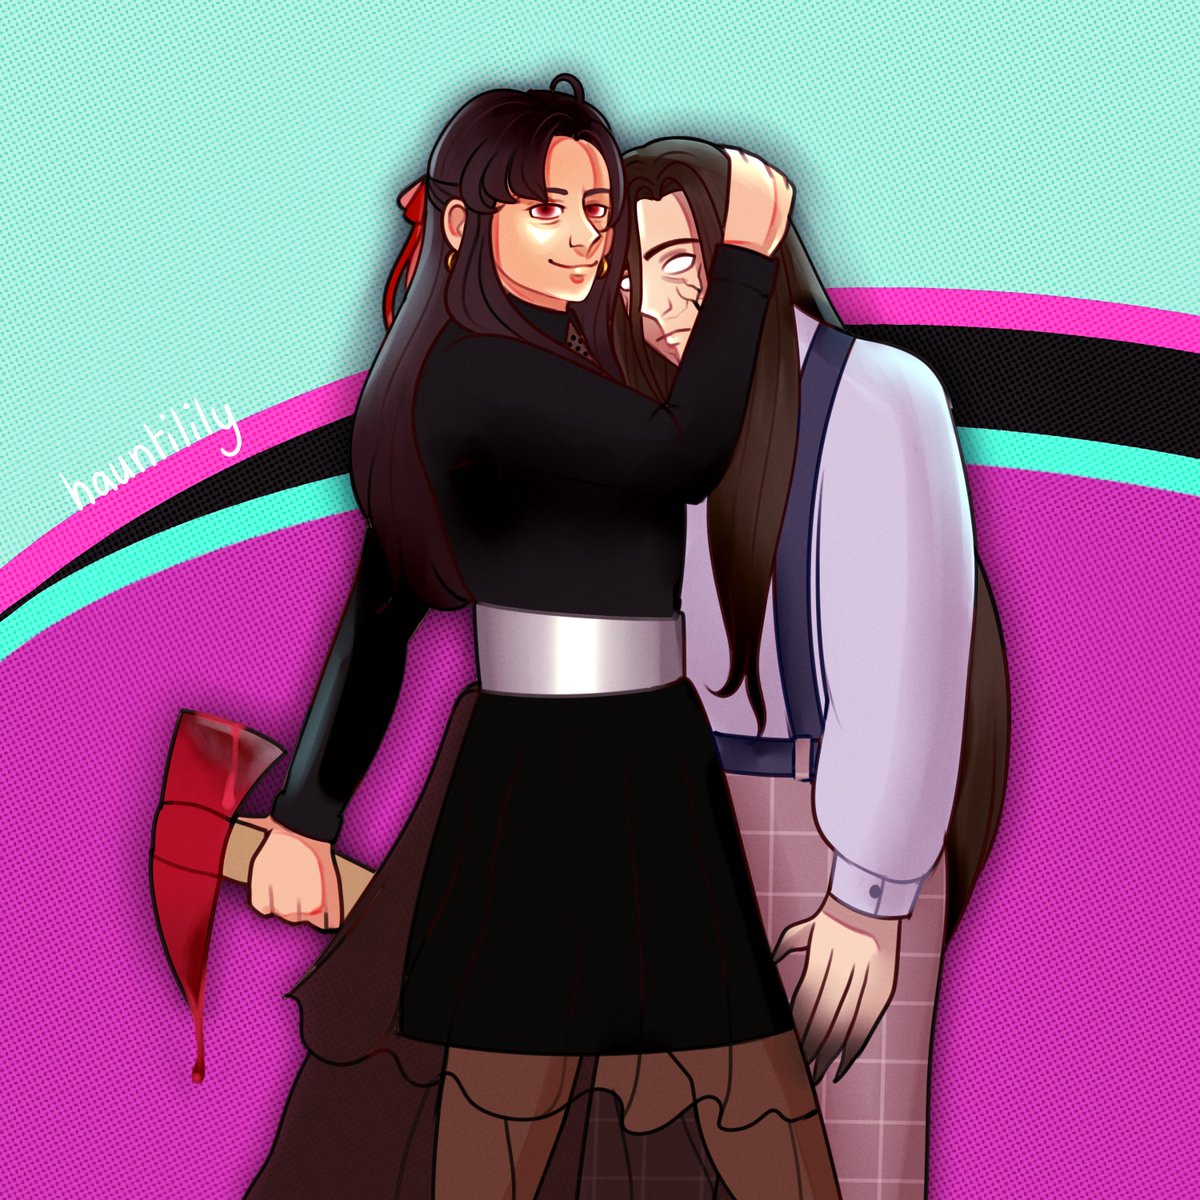 i just watched lisa frankenstein for the first time and i thought of them straight away [#魔道祖师 #MDZS #MoDaoZuShi #NingXian #WeiWuxian #WenNing]